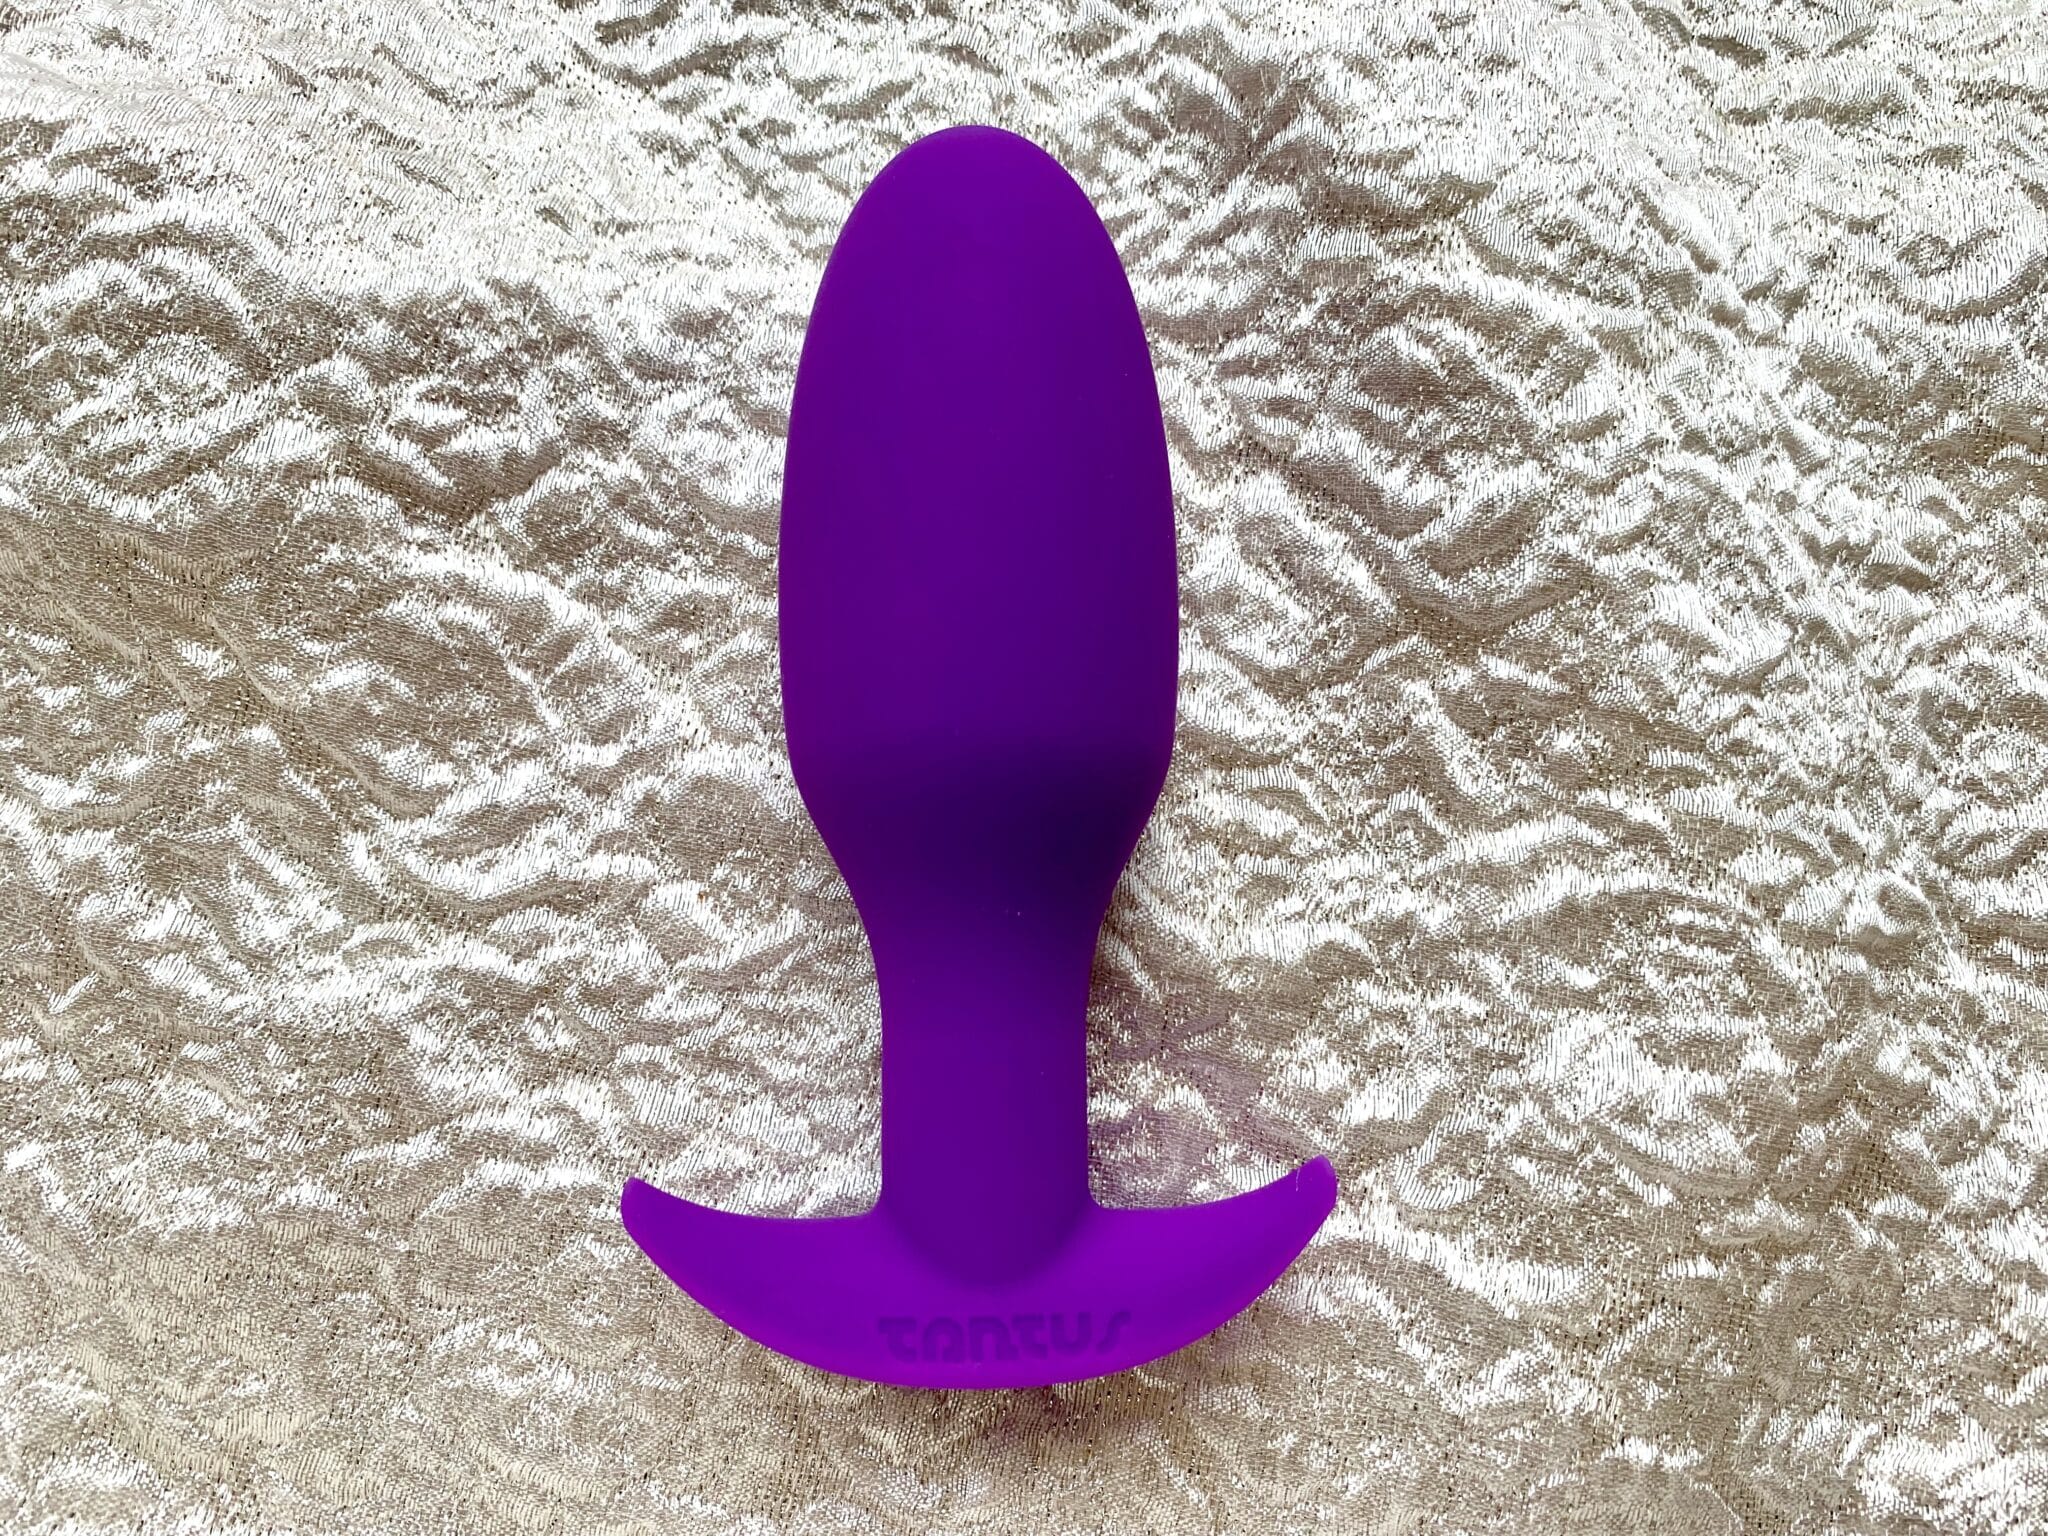 Tantus Ryder What I like/dislike about the design